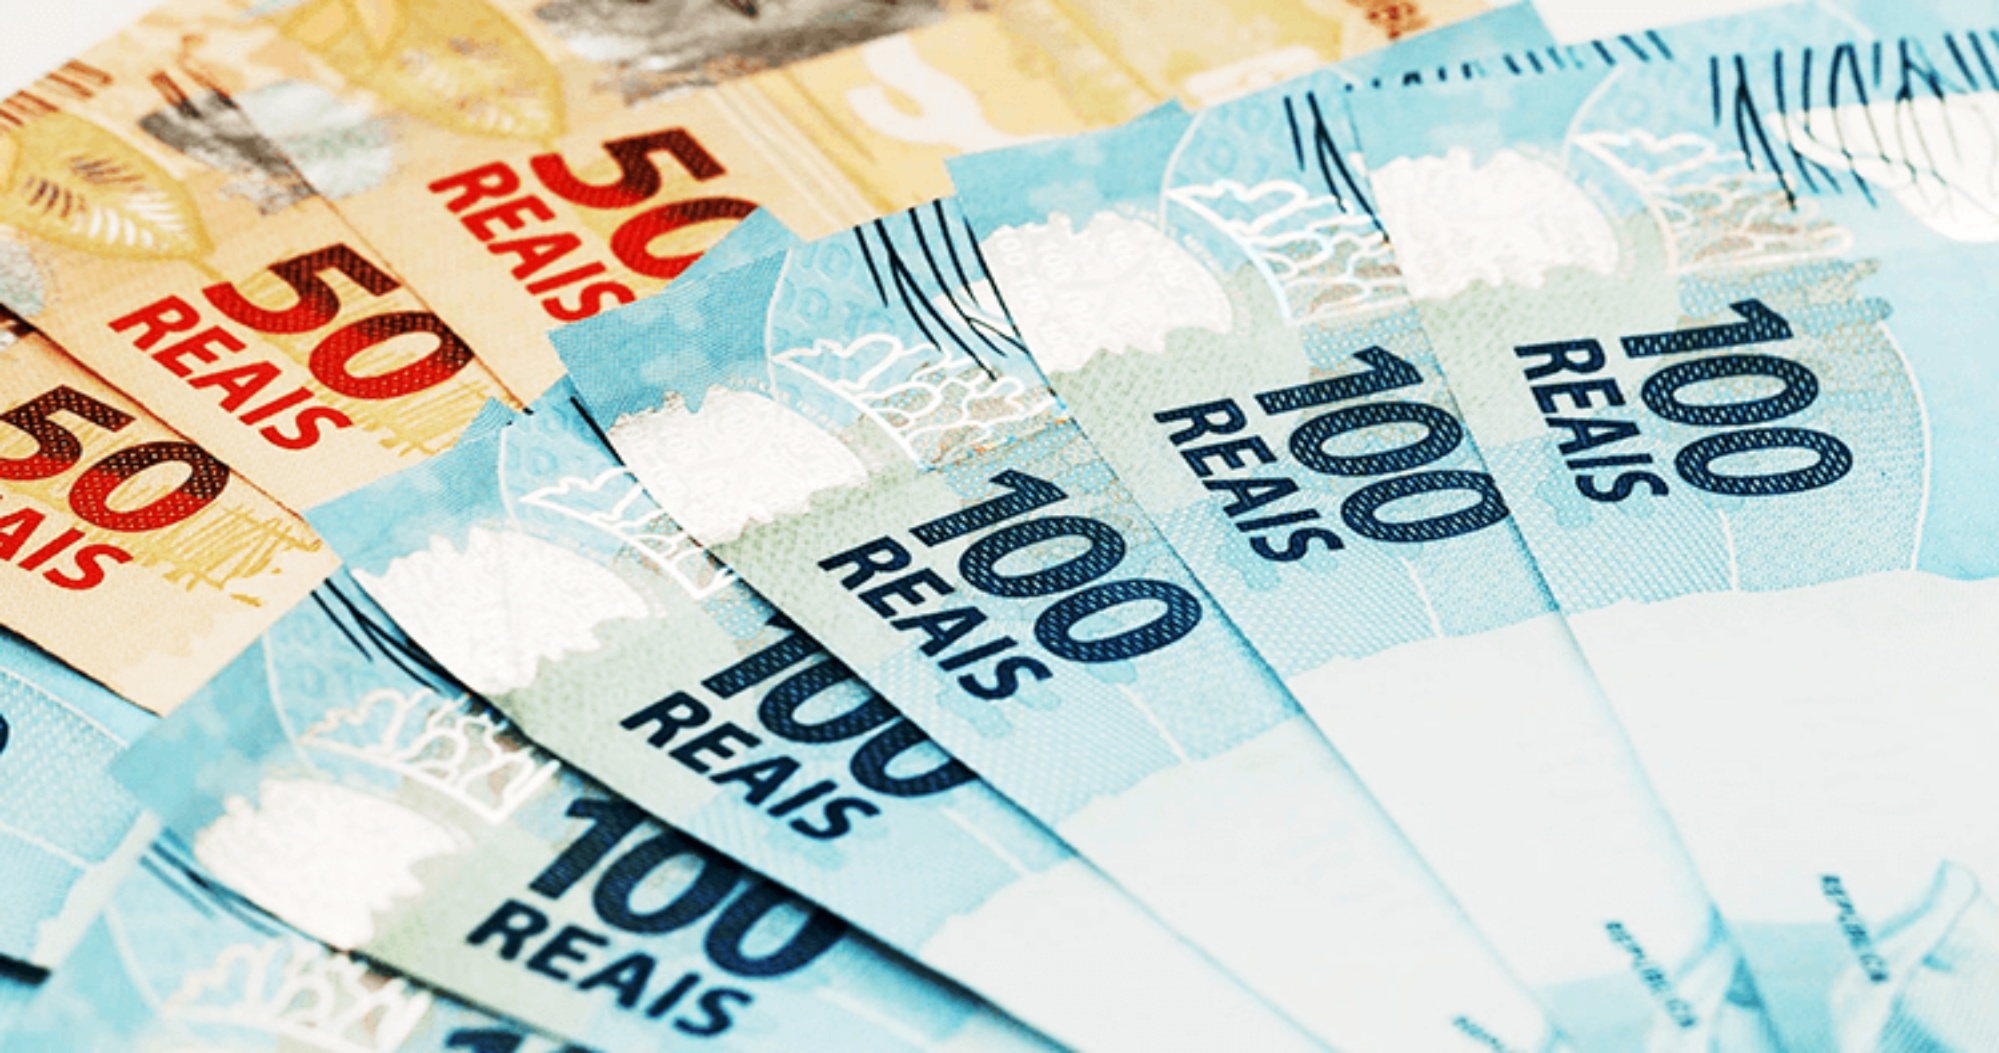 Real (R$) – The Brazilian Currency